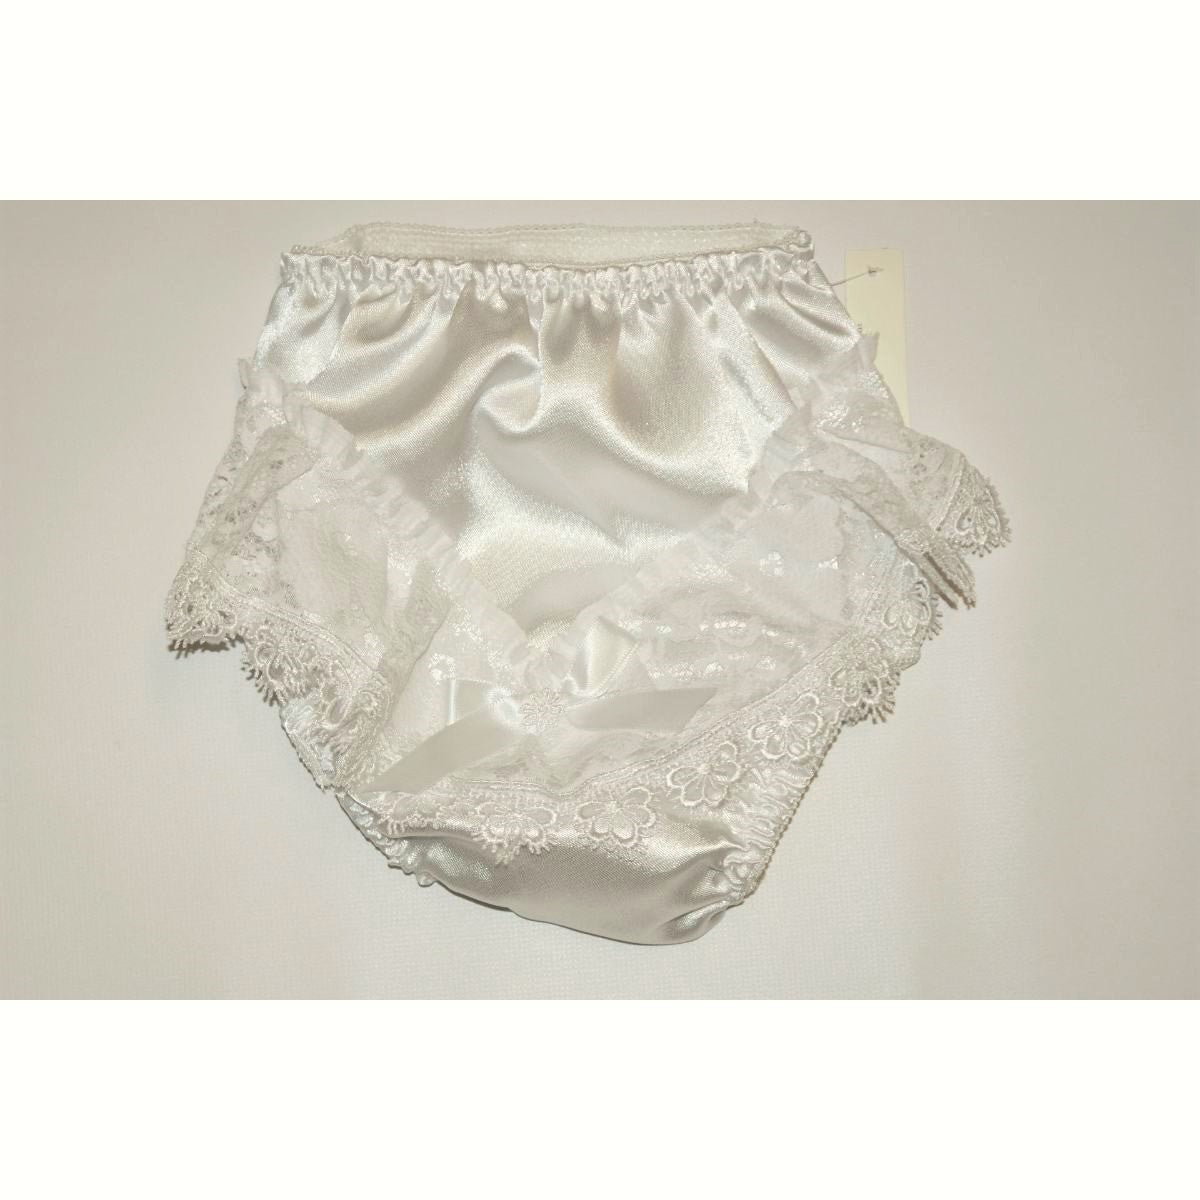 BABY TODDLER GIRLS SATIN FRILLY LACE KNICKERS PANTS IN WHITE AND